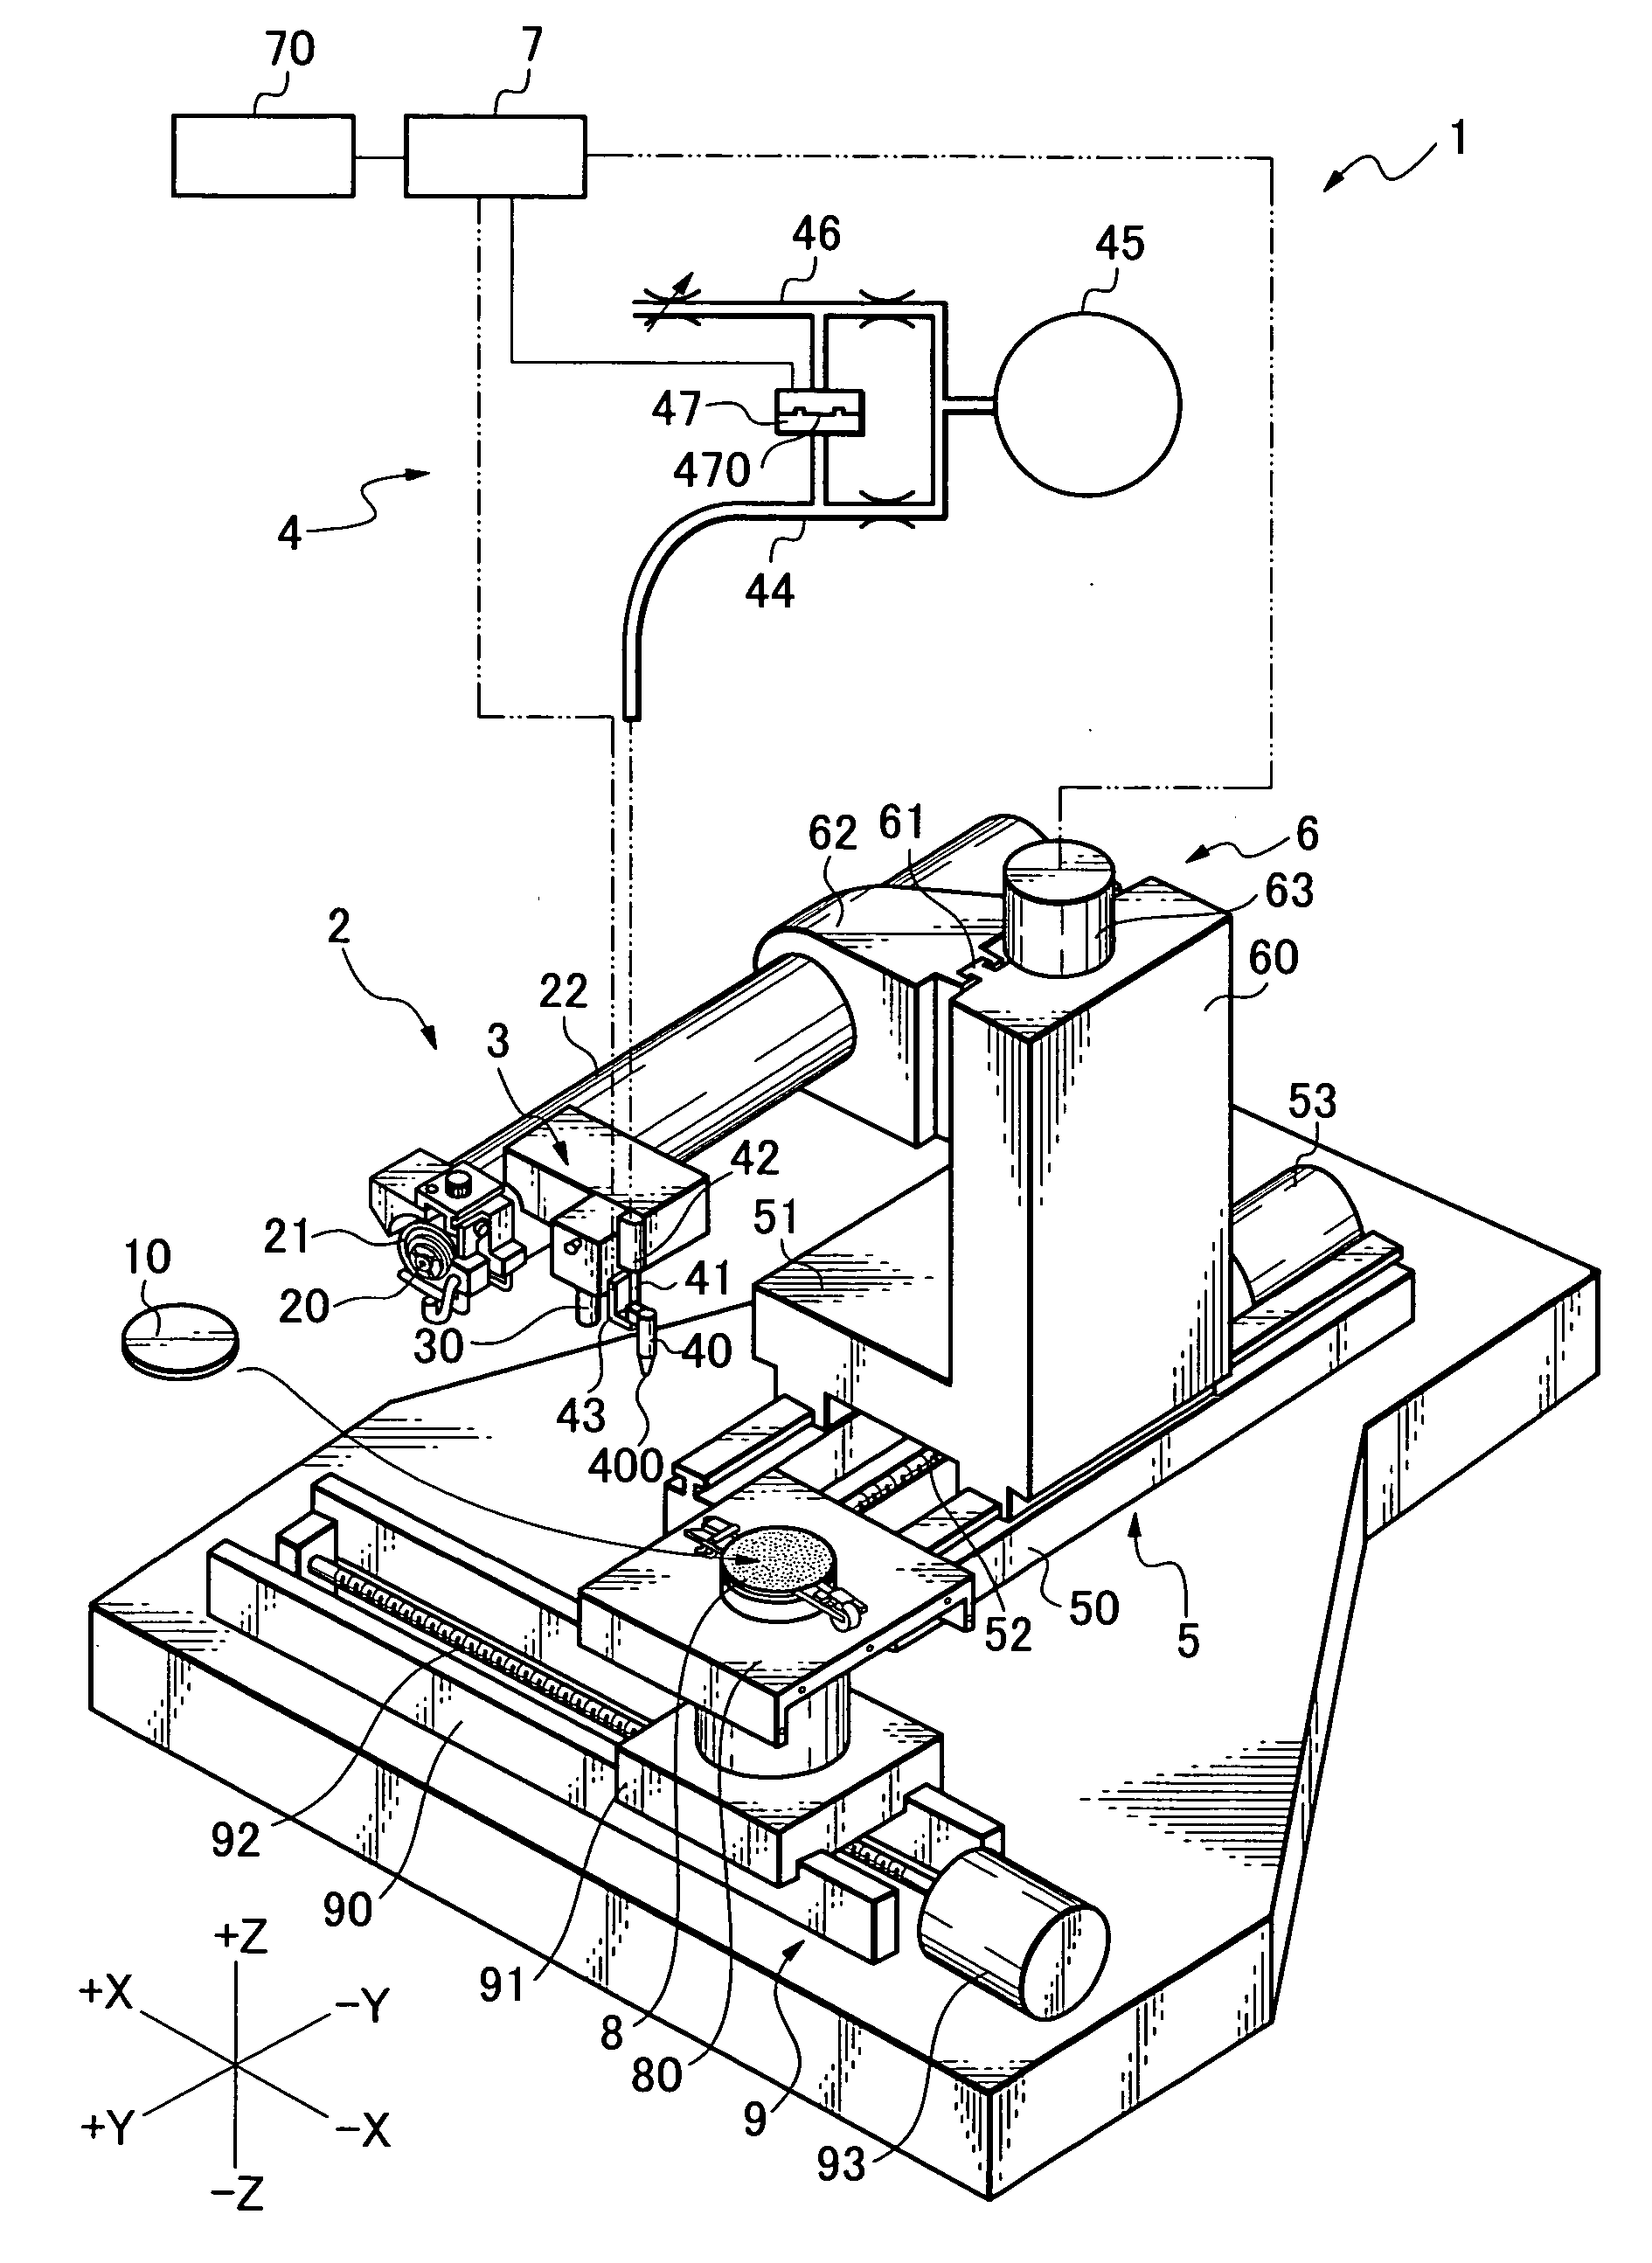 Processing apparatus provided with backpressure sensor